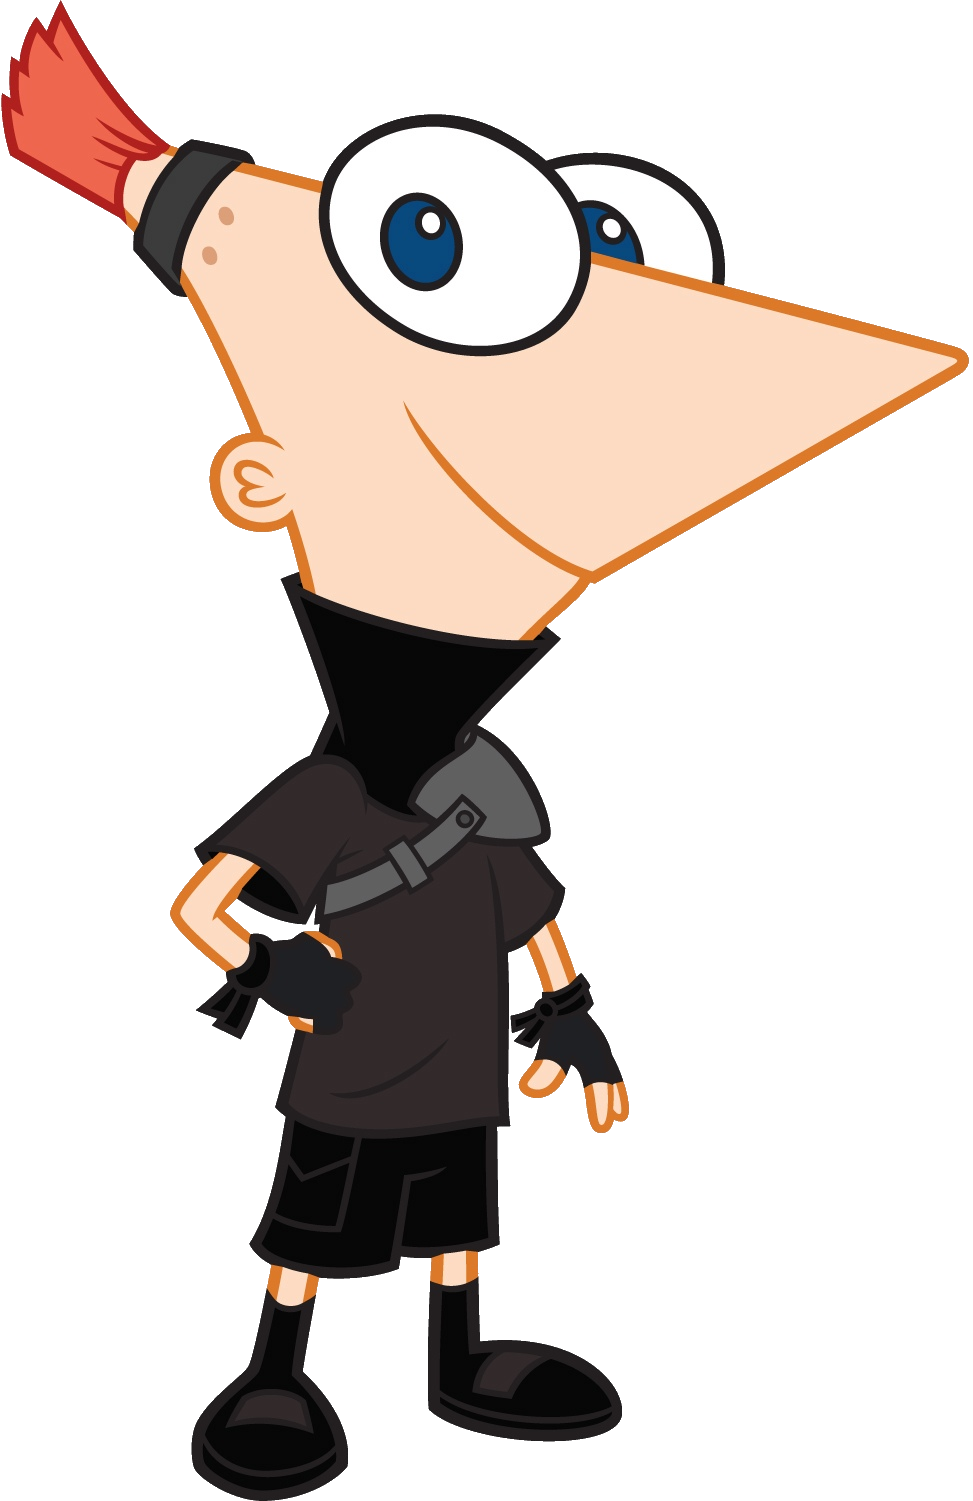 Rat clipart mascot. Phineas flynn nd dimension